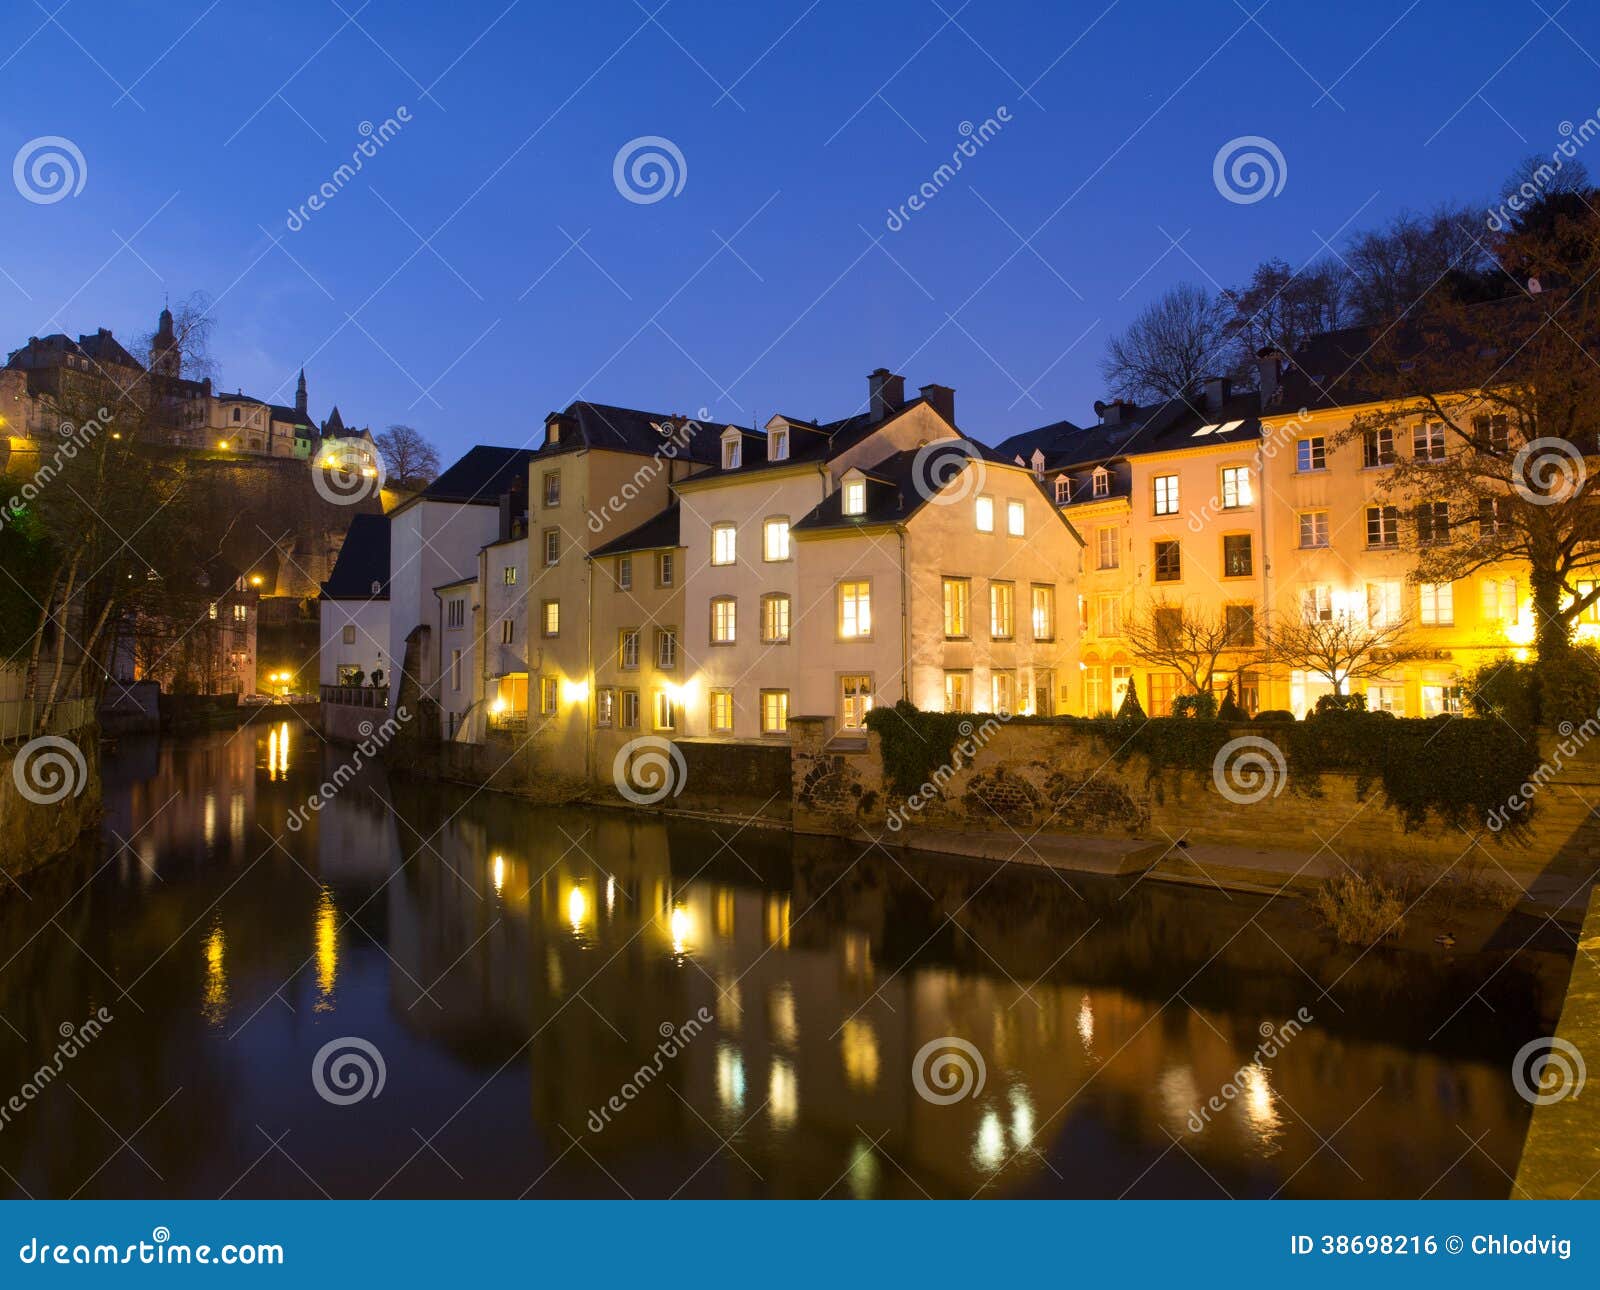 houses in grund, luxembourg city, at night